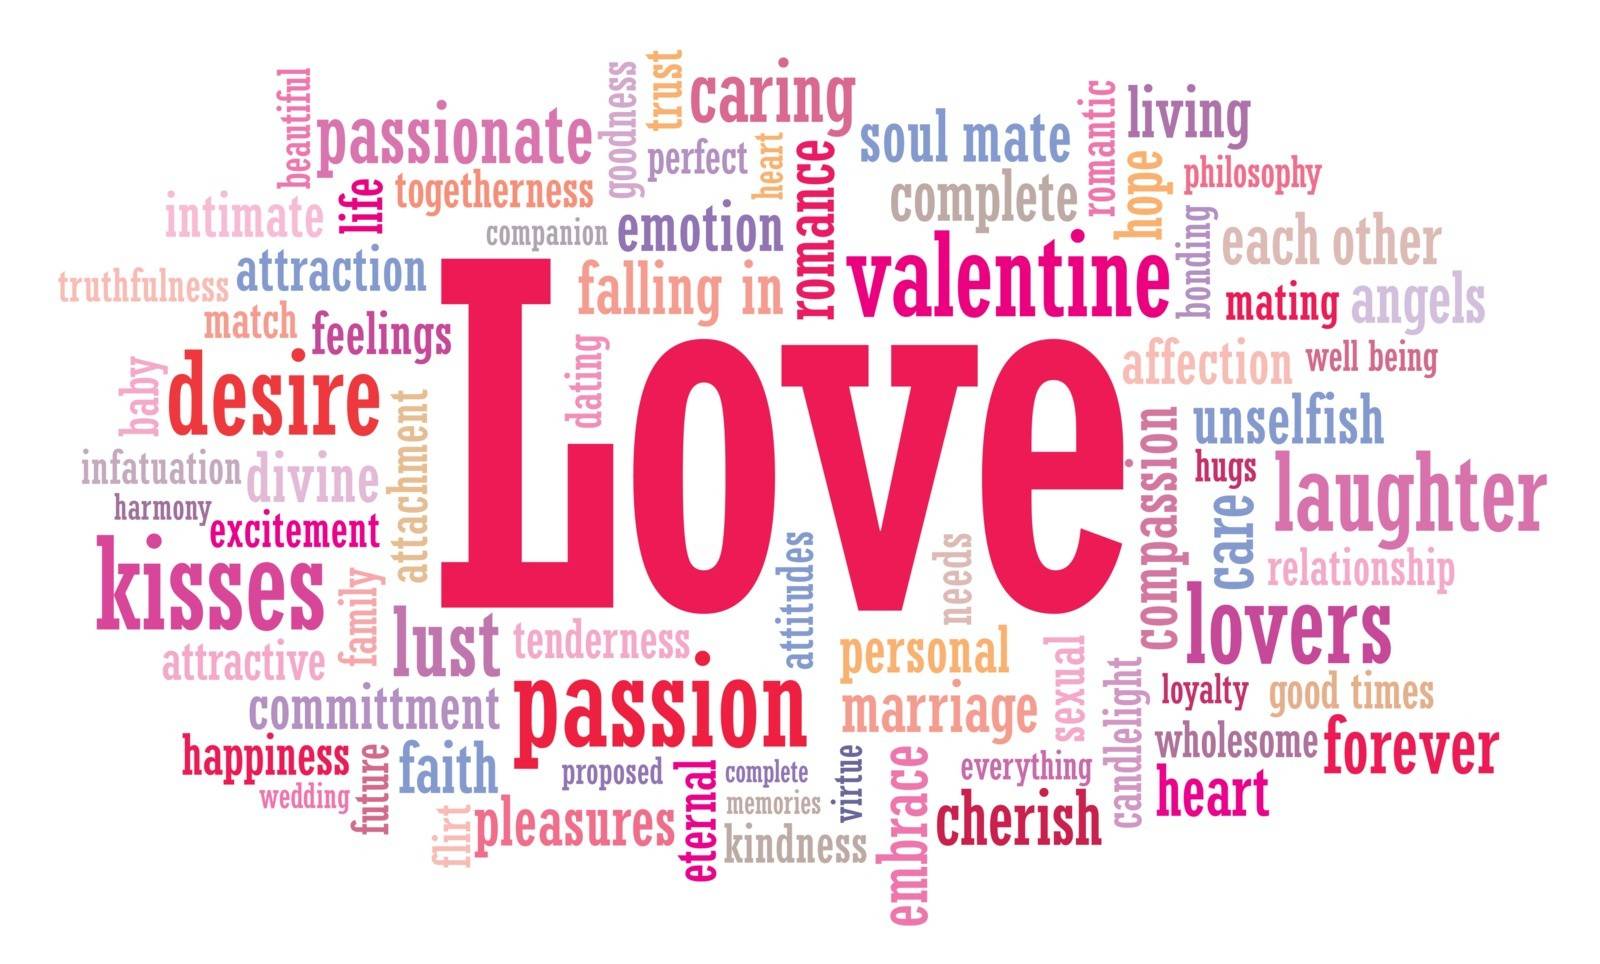 Love related tag cloud illustration in vector format